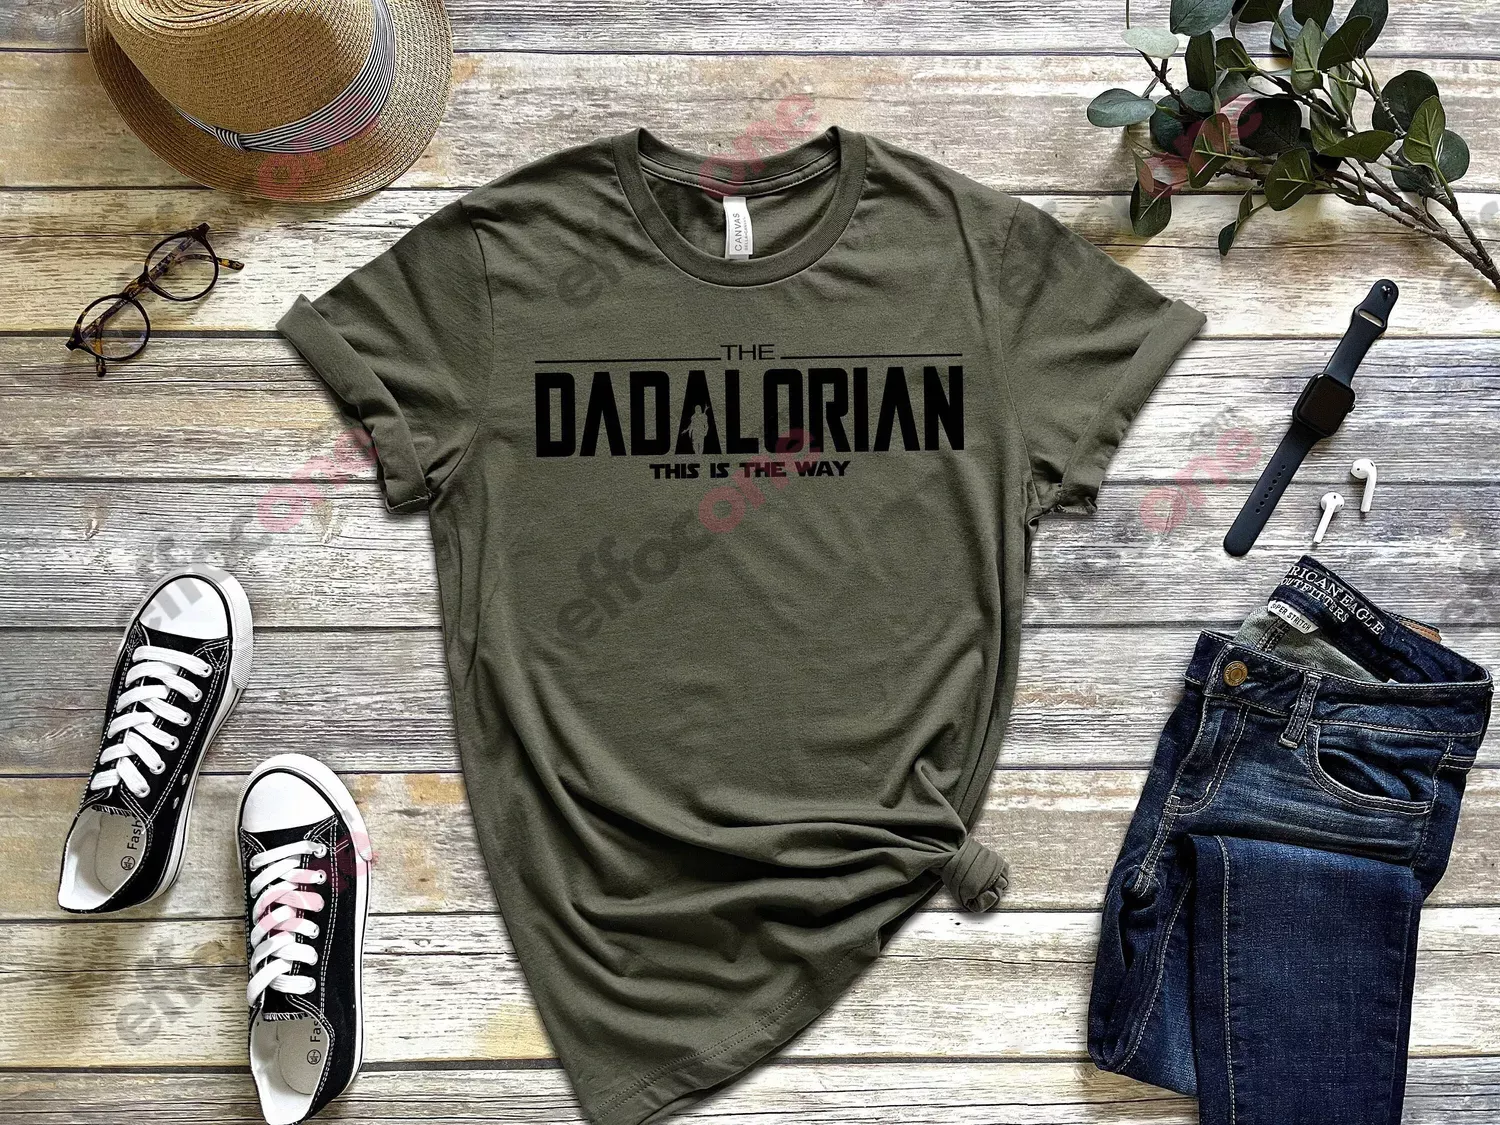 The Dadalorian This Is The Way